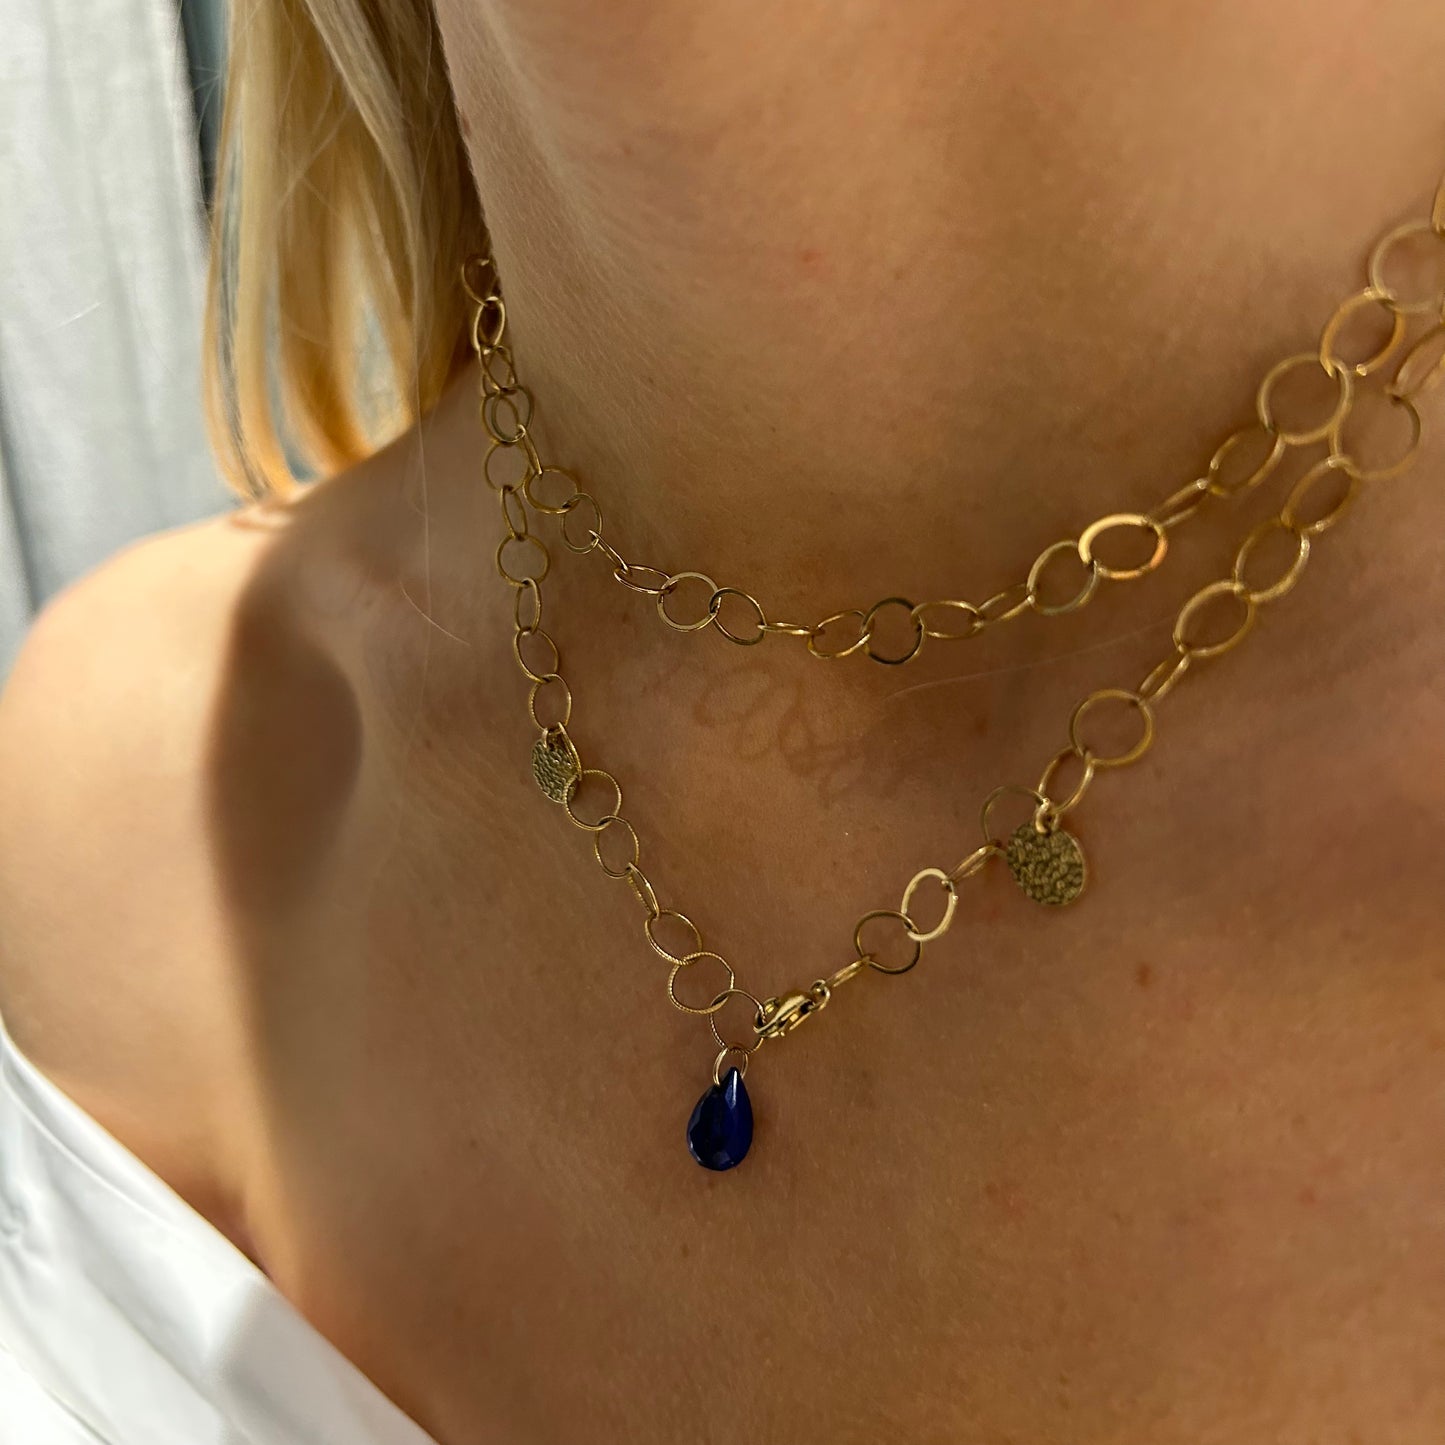 Circle 14k gold filled chain with lapis pendant and gold medallions